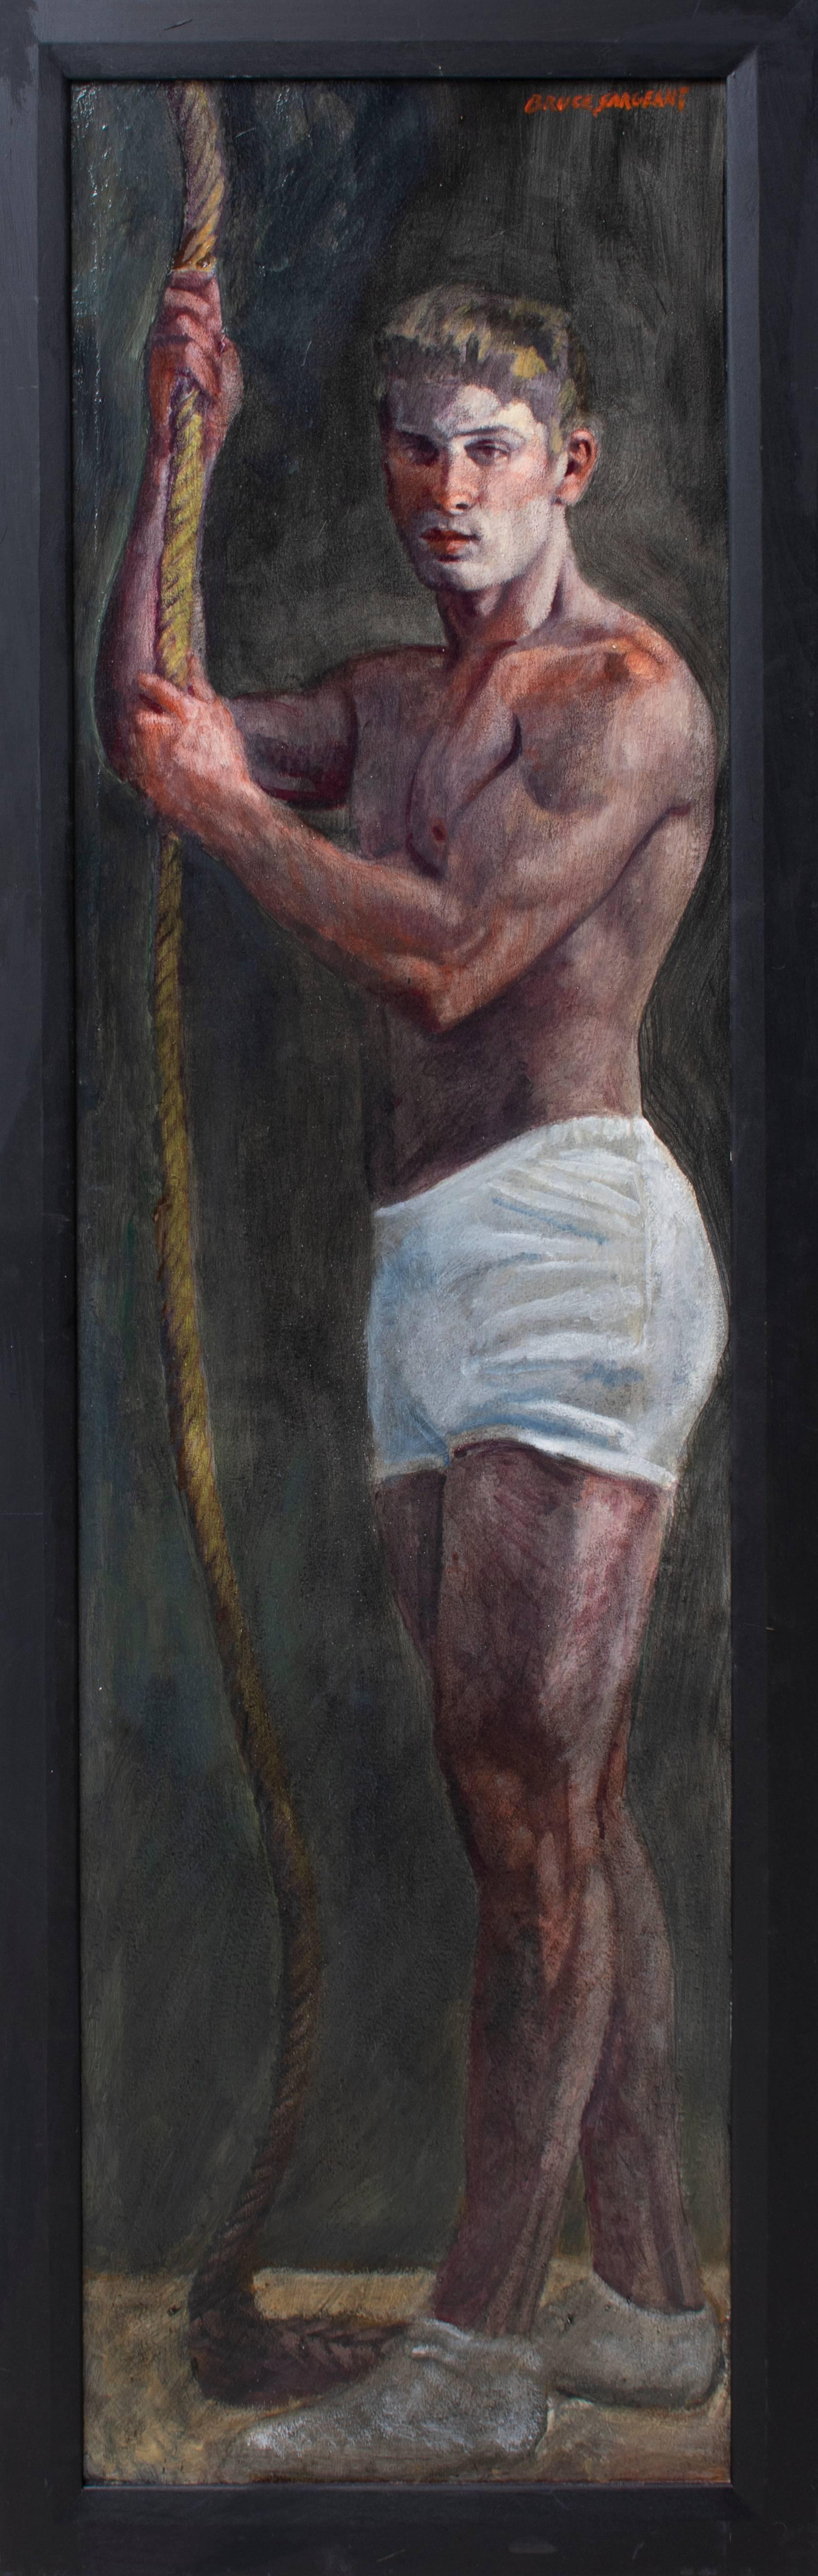 Boy on Rope III (Large Figurative Painting on Canvas of an Athlete on a Rope) 3